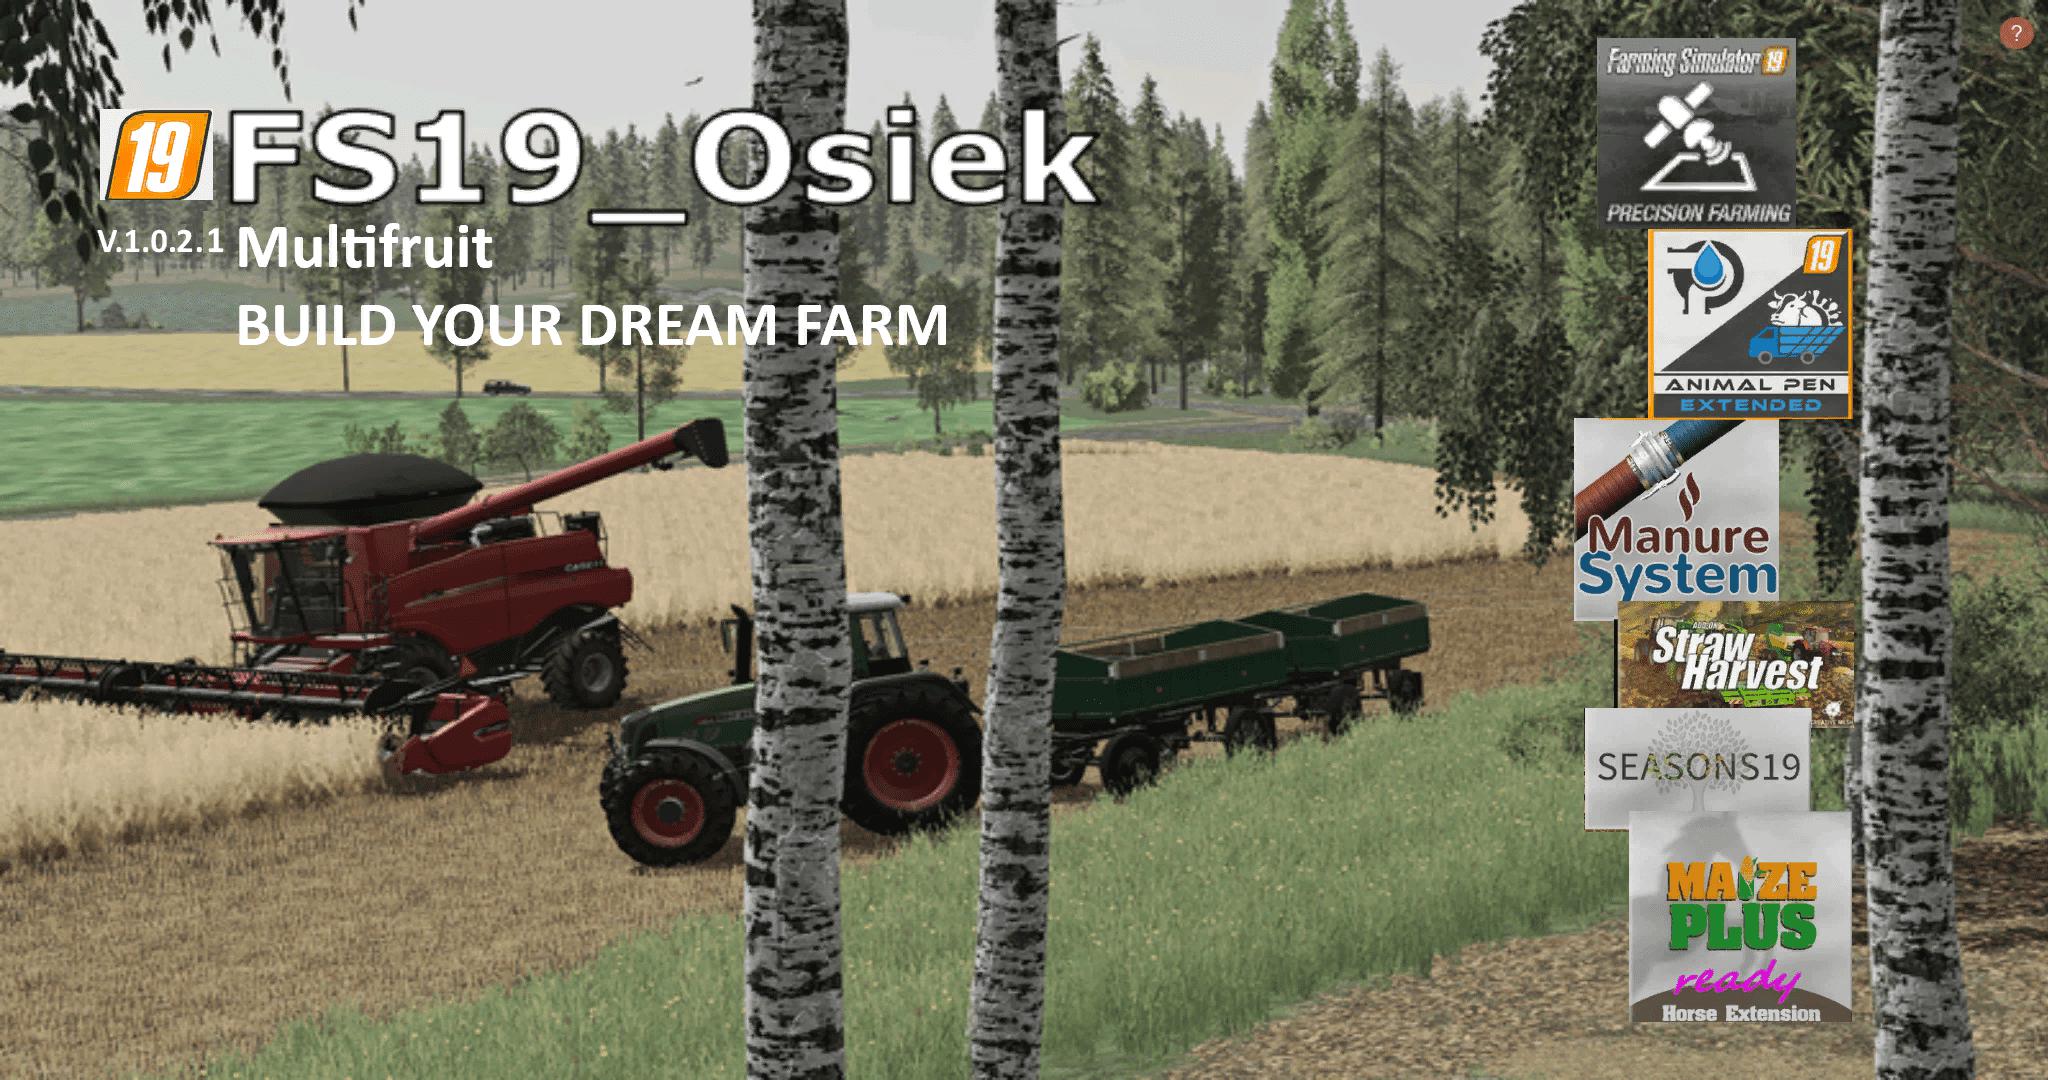 how to harvest canola in farming simulator 2014